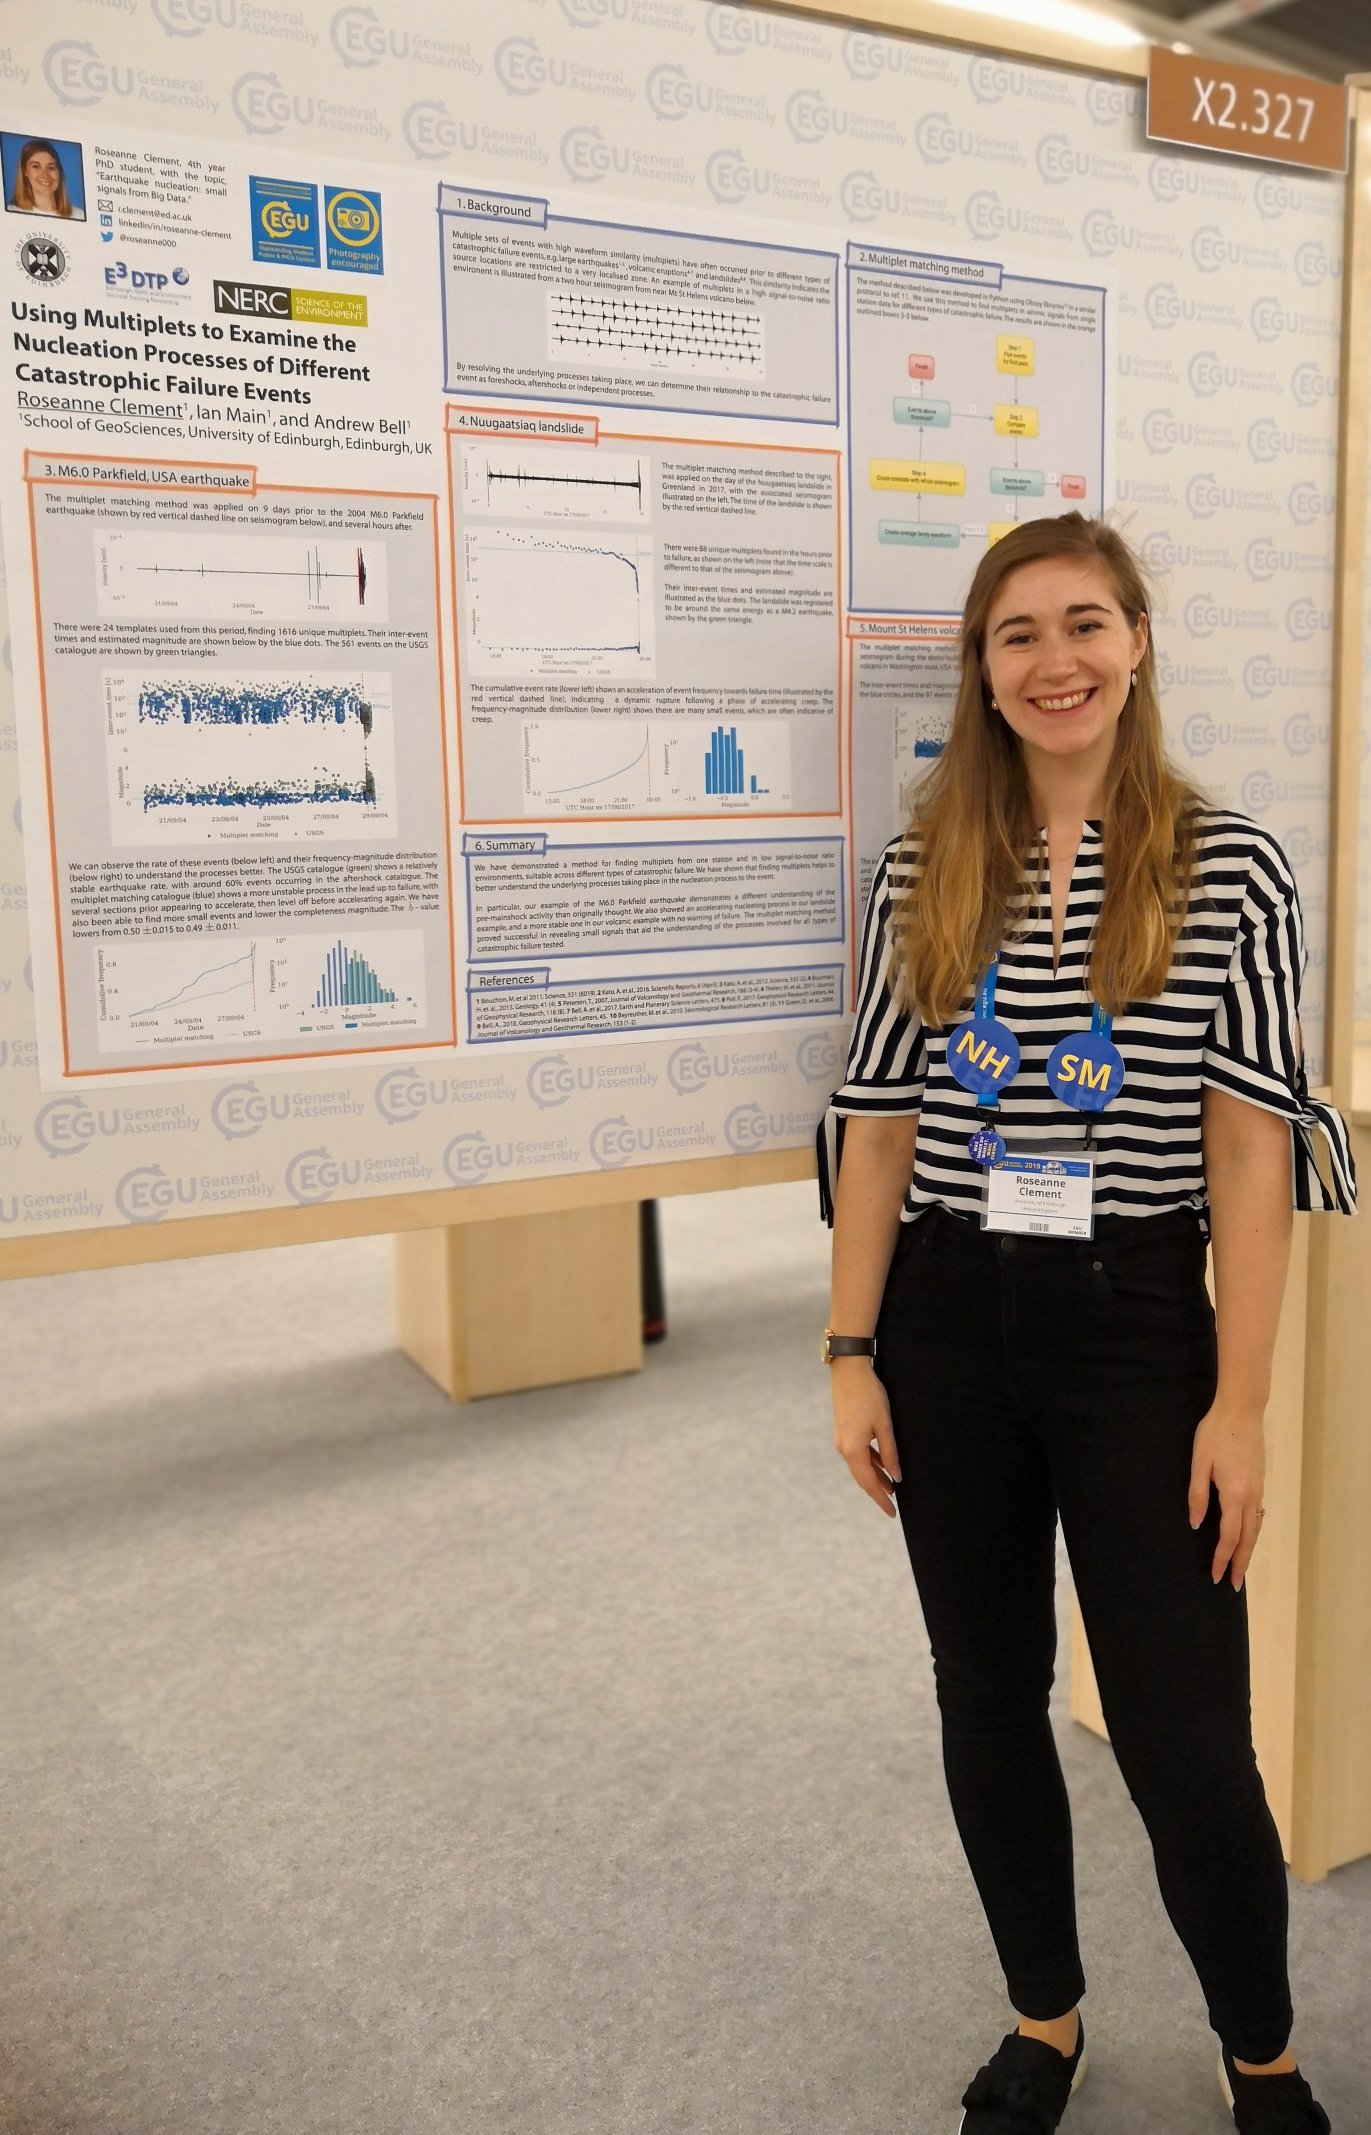 Roseanne Clement at the European Geosciences Union (EGU) General Assembly - April 2019